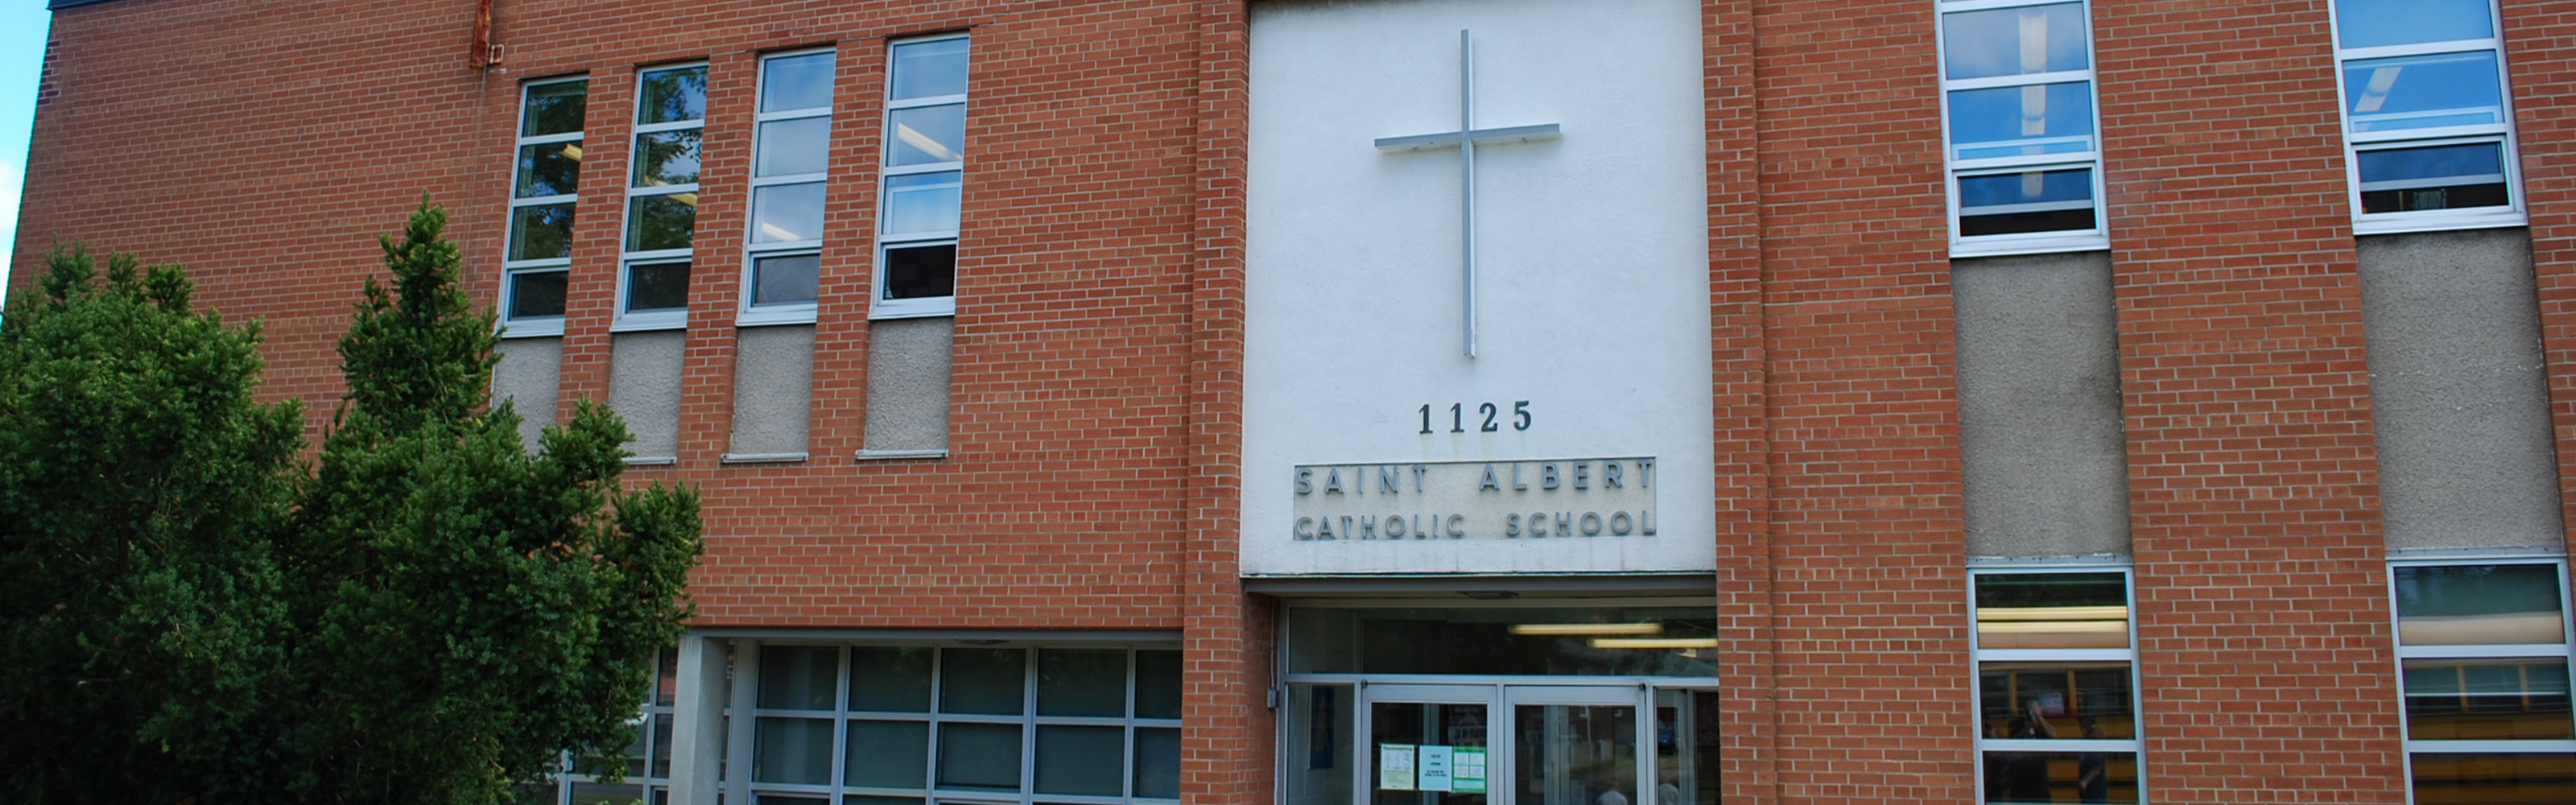 The front of the St. Albert Catholic School building.